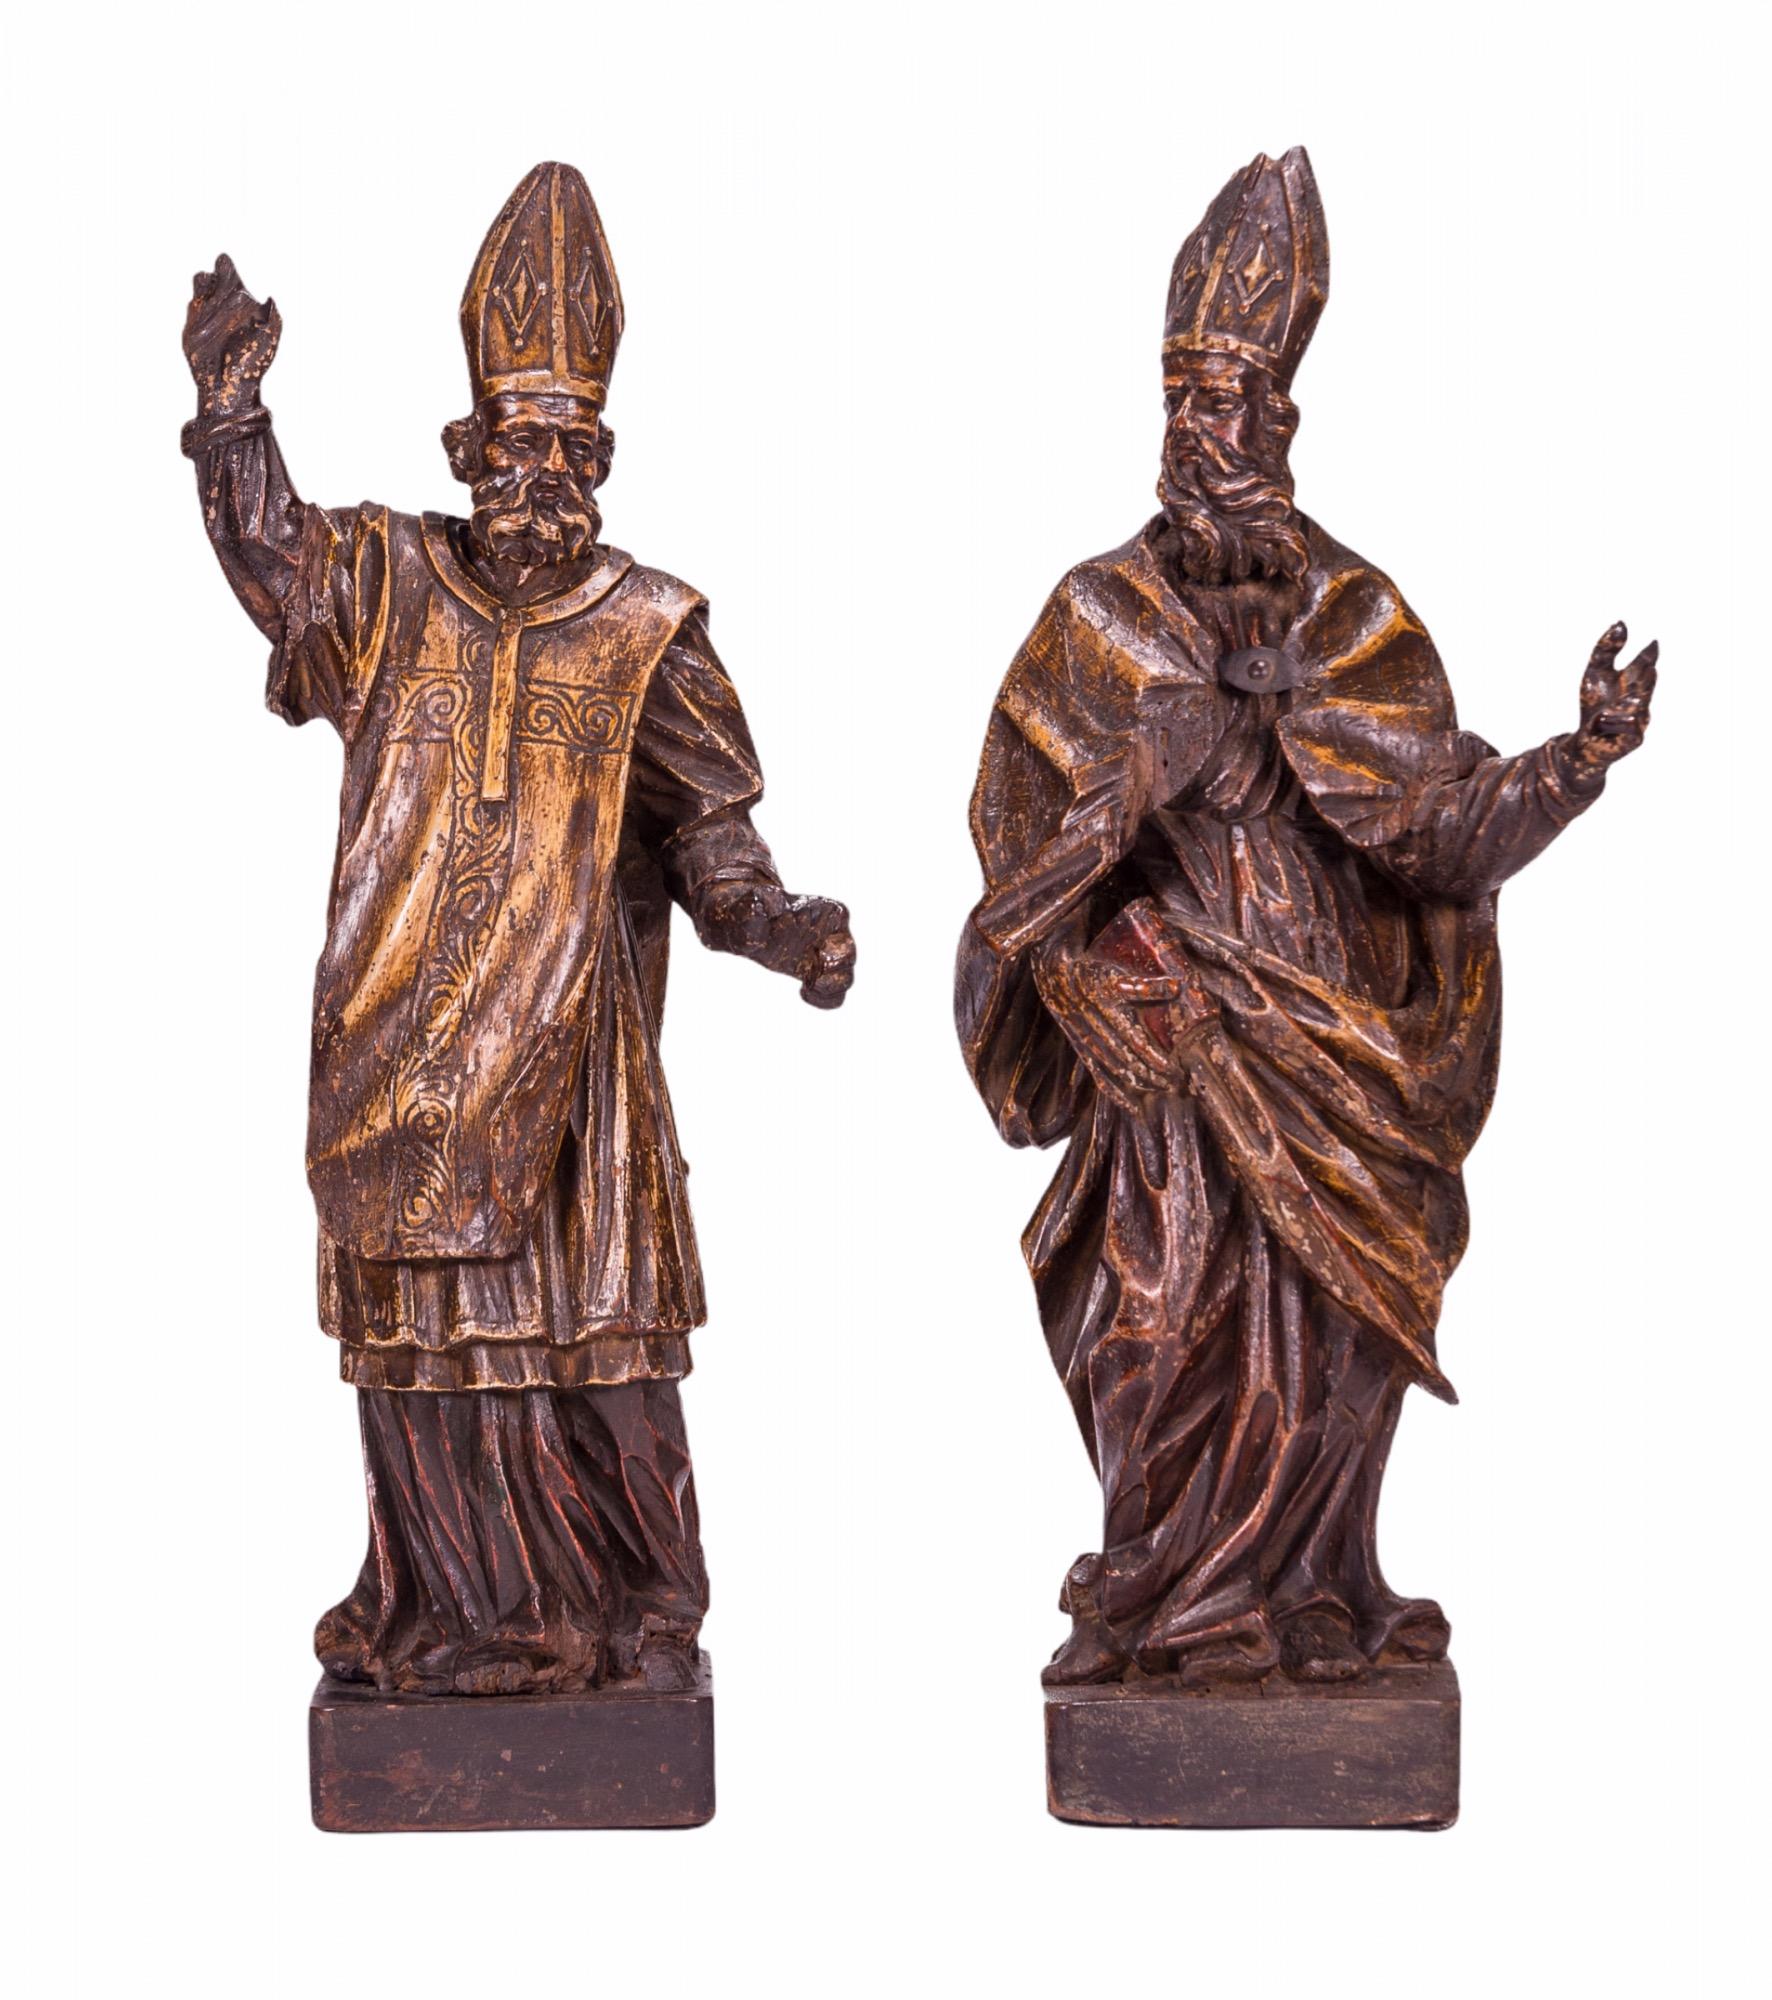 A pair of 16th Century Italian wood carved figures of Saint Ambrose Archbishop of Milan and Saint Augustine Bishop of Hippo, two of the four original Doctors of the Church.